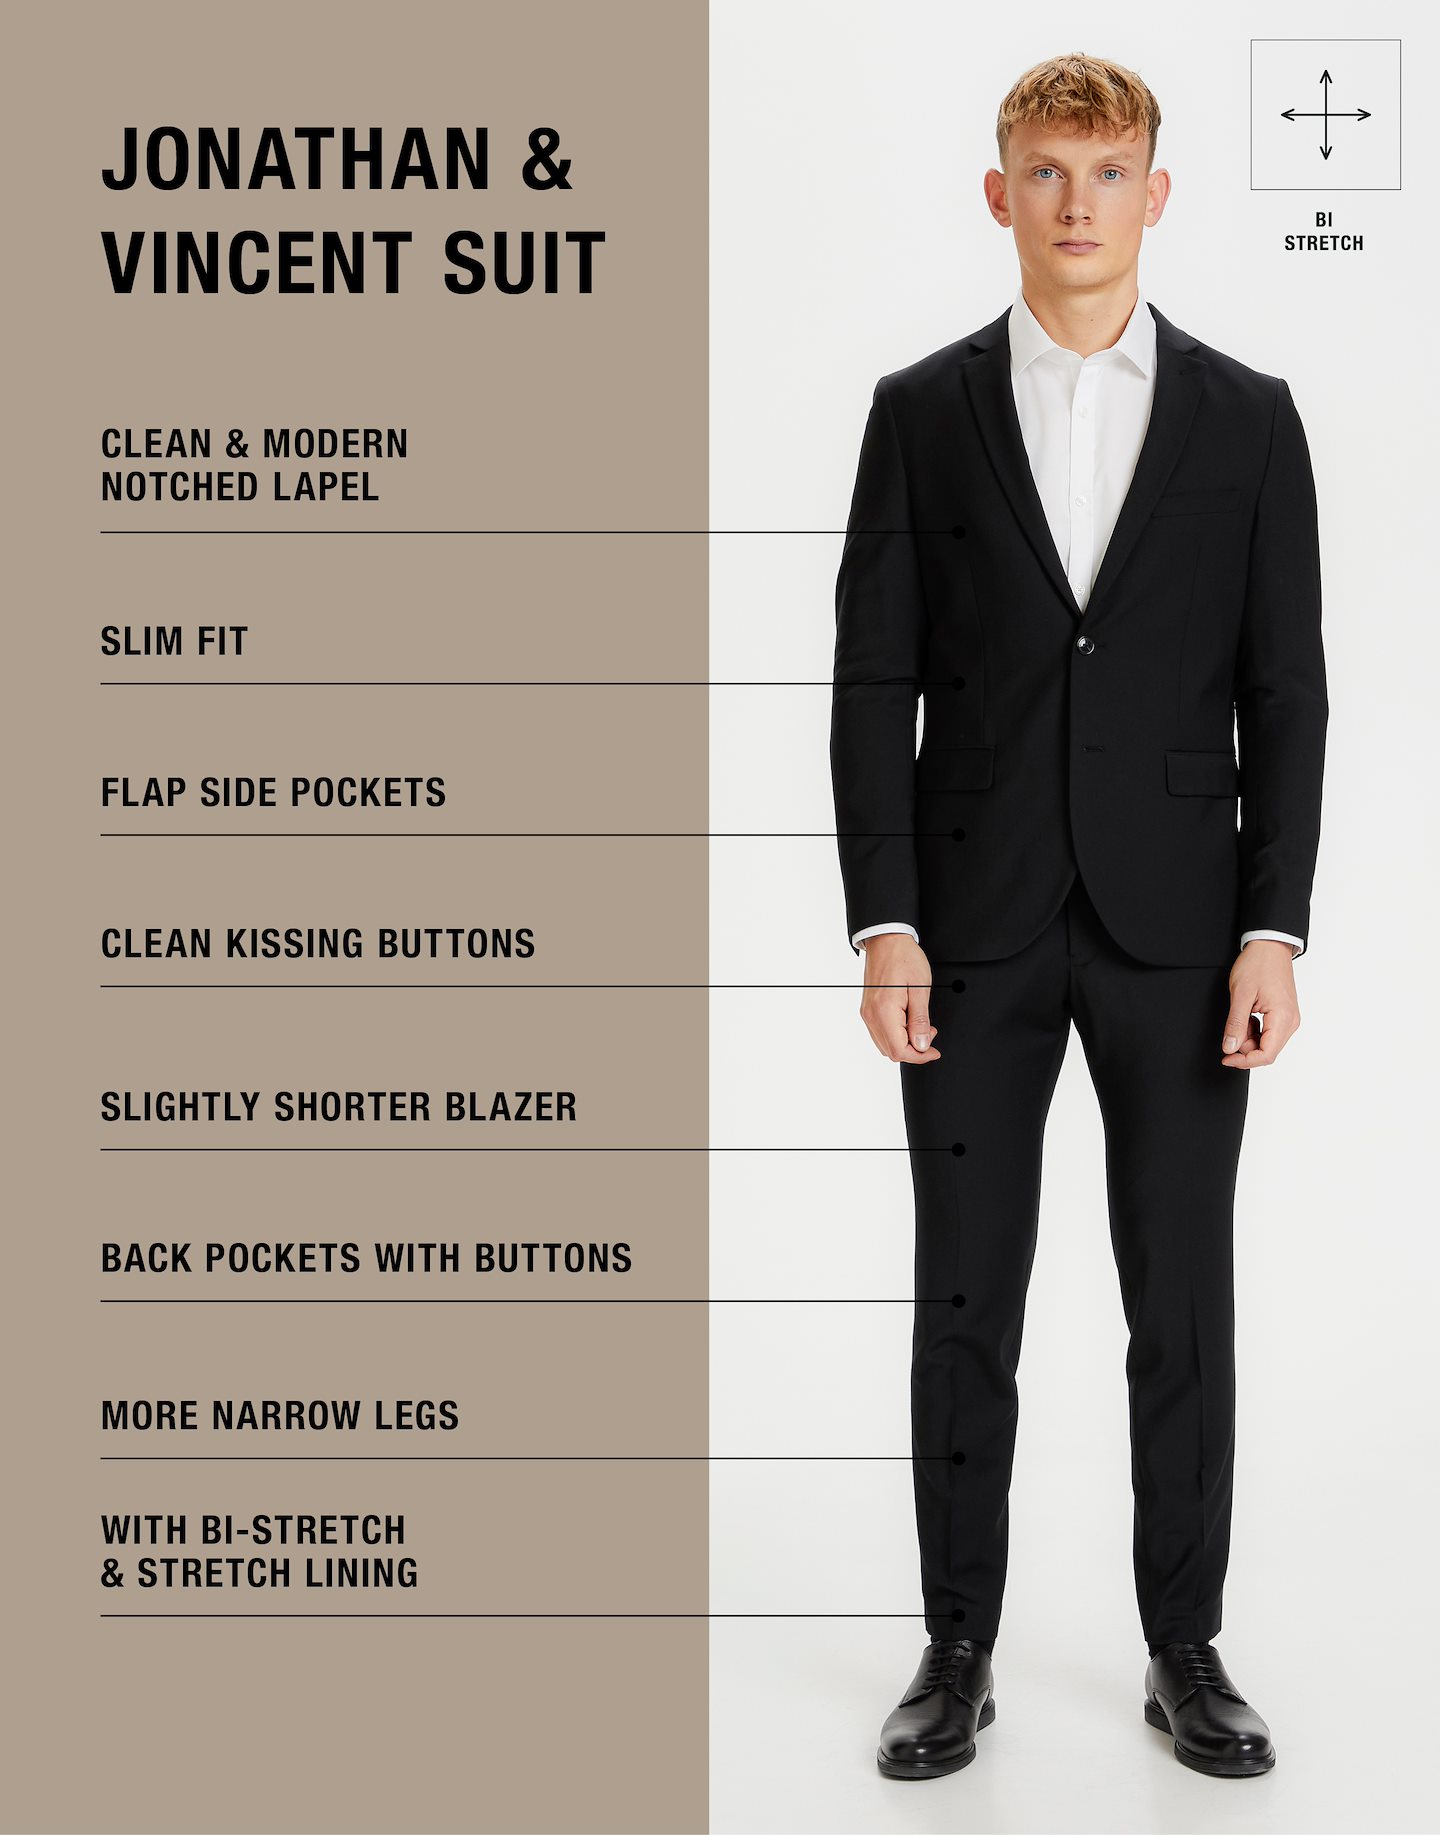 Pocket vs Pocketless Dress Shirt: Which Is Best for Suits? – StudioSuits